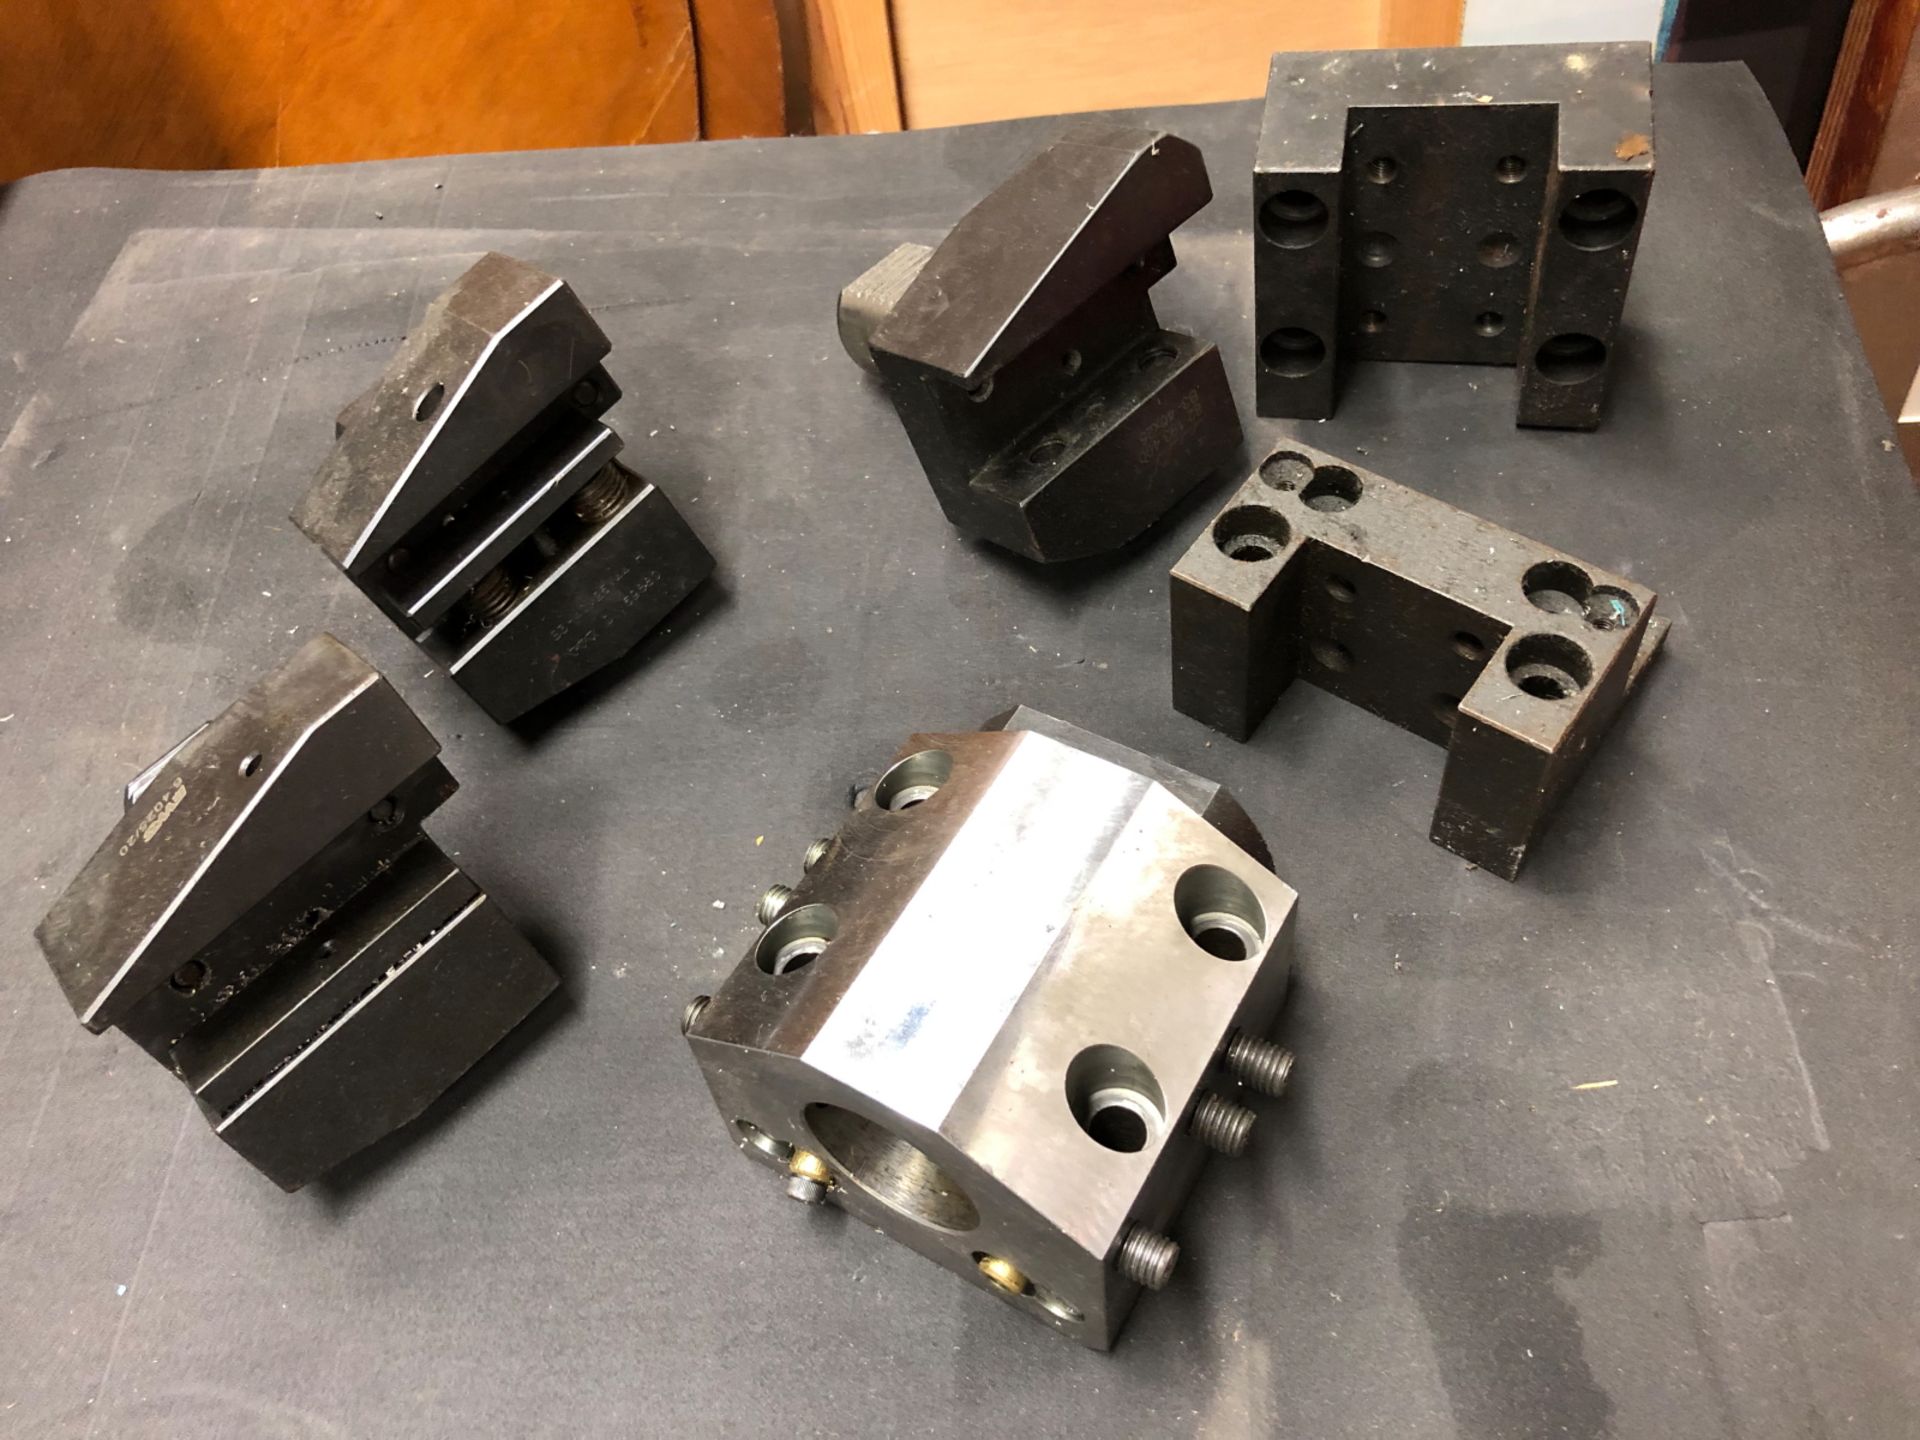 6 VARIOUS CNC TOOL HOLDERS.